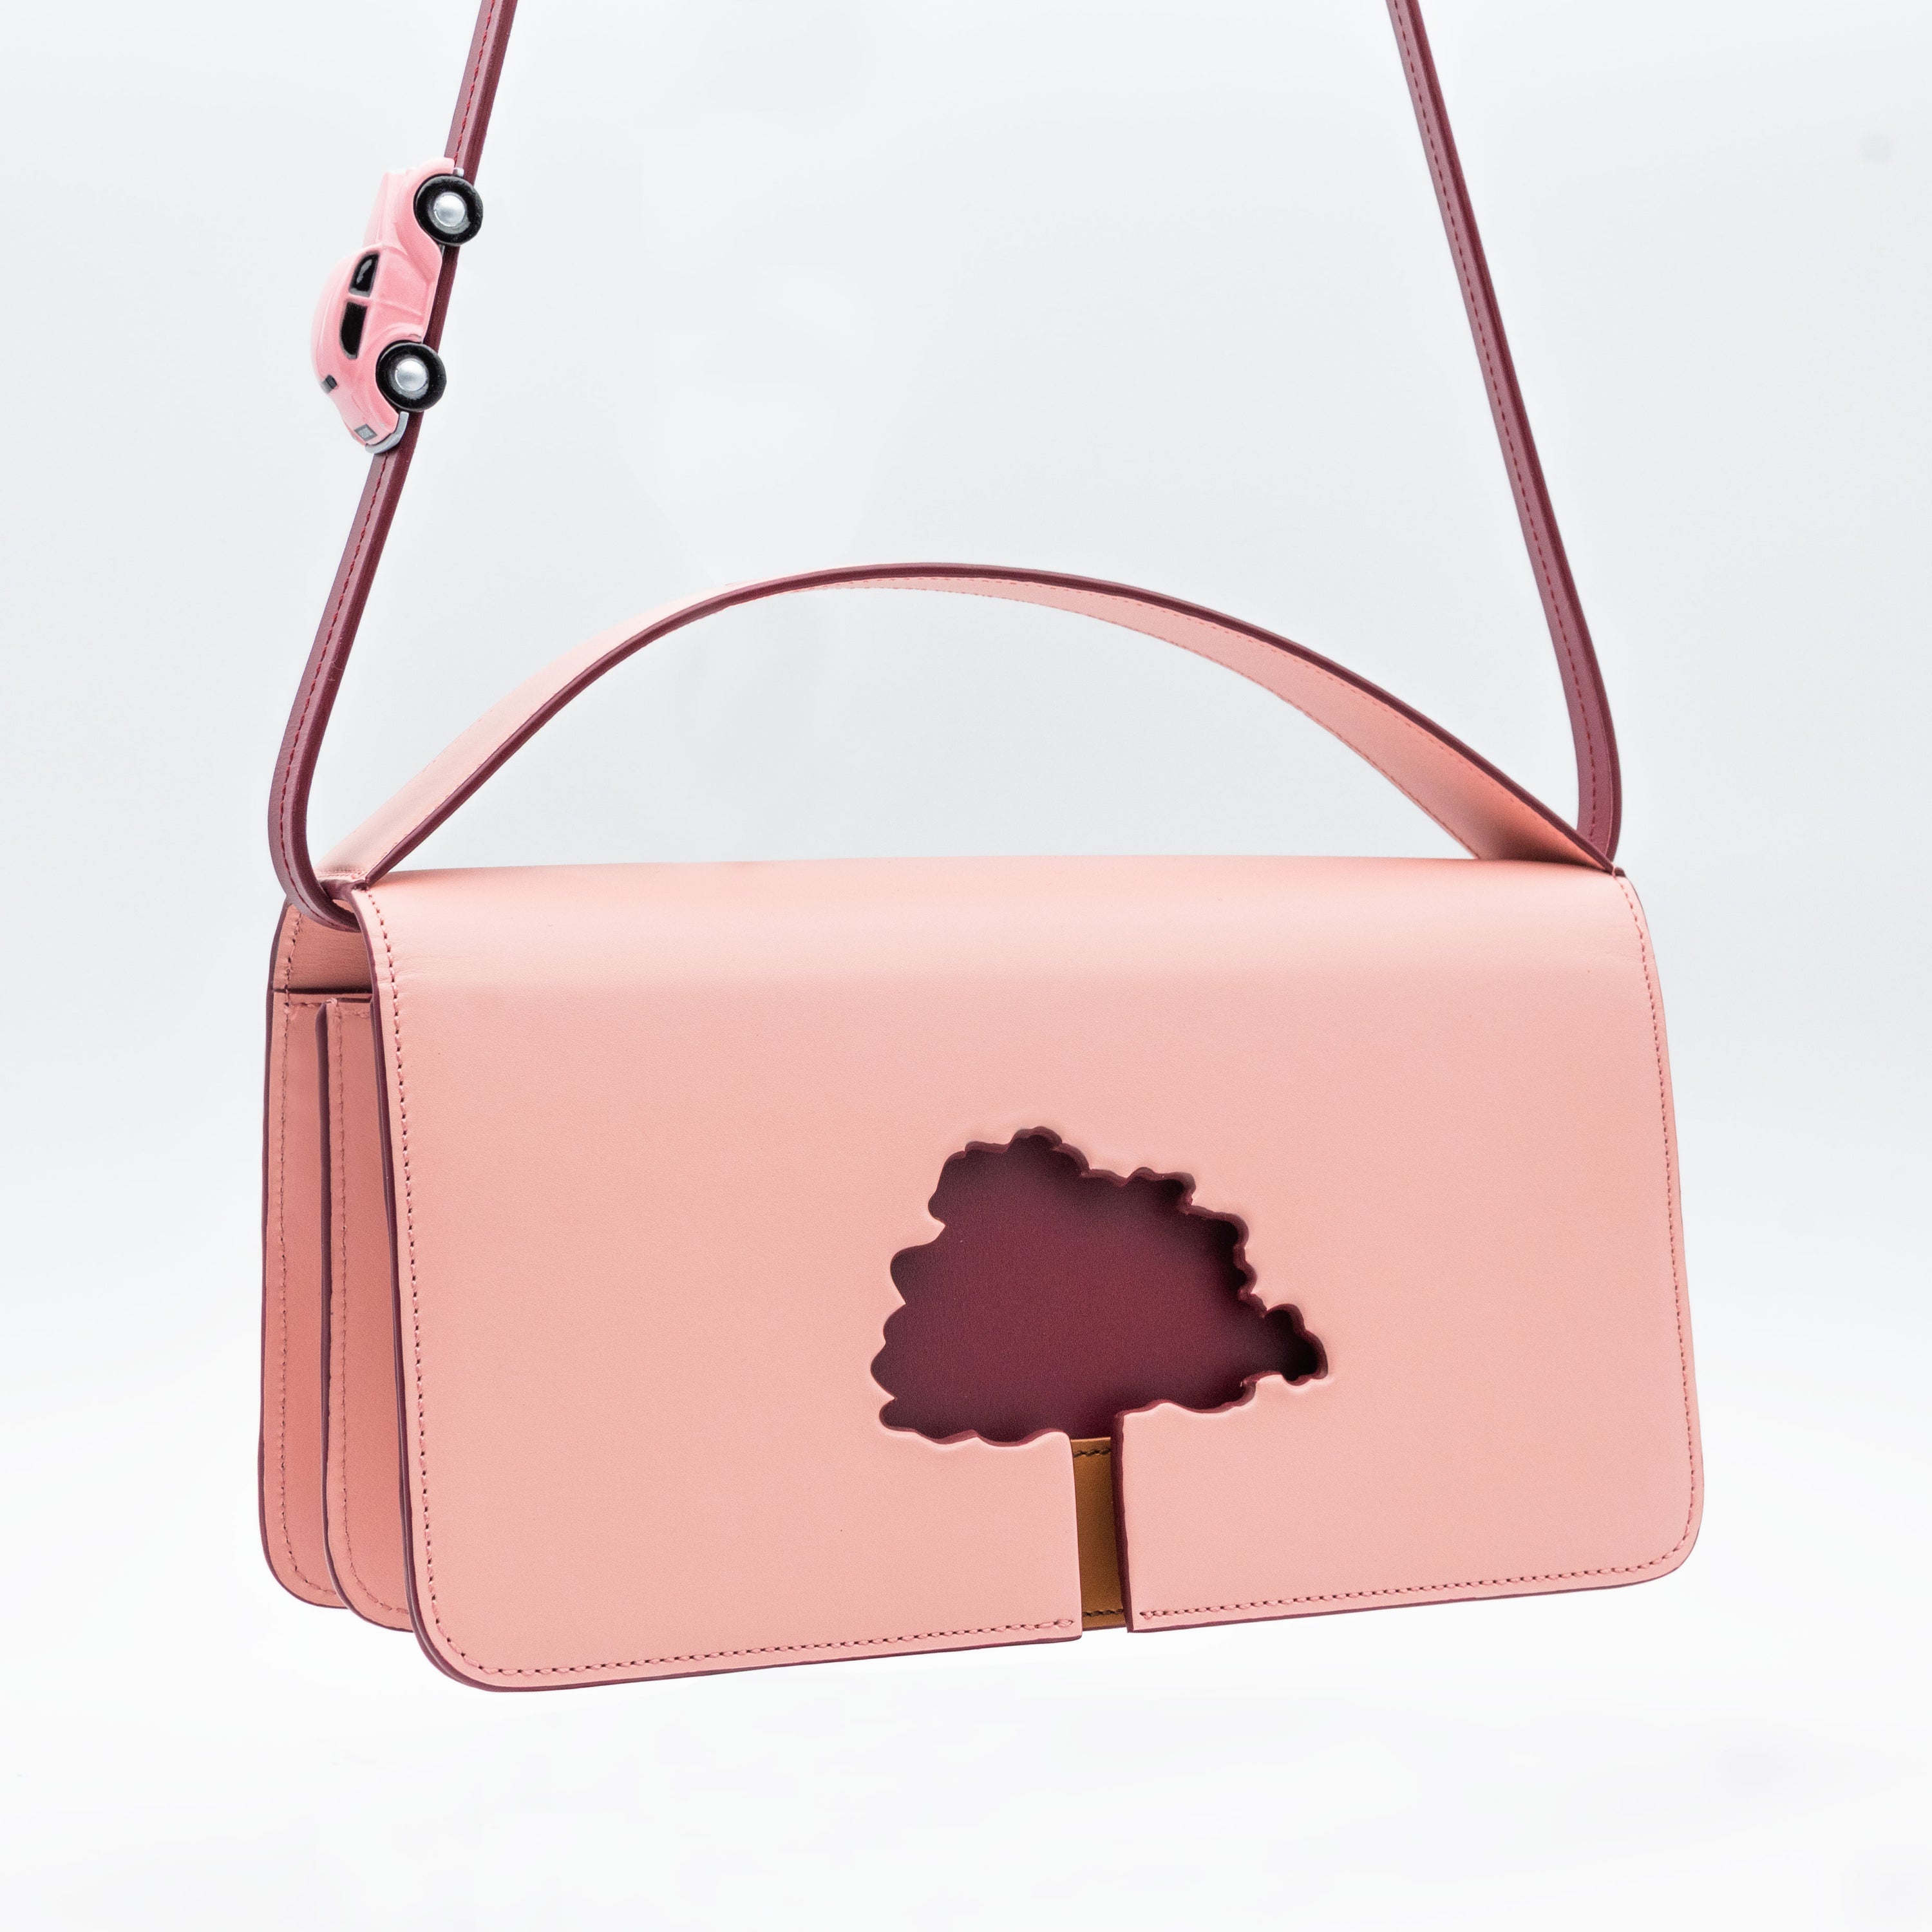 SPEED LIMIT Medium Bag in Pink Leather